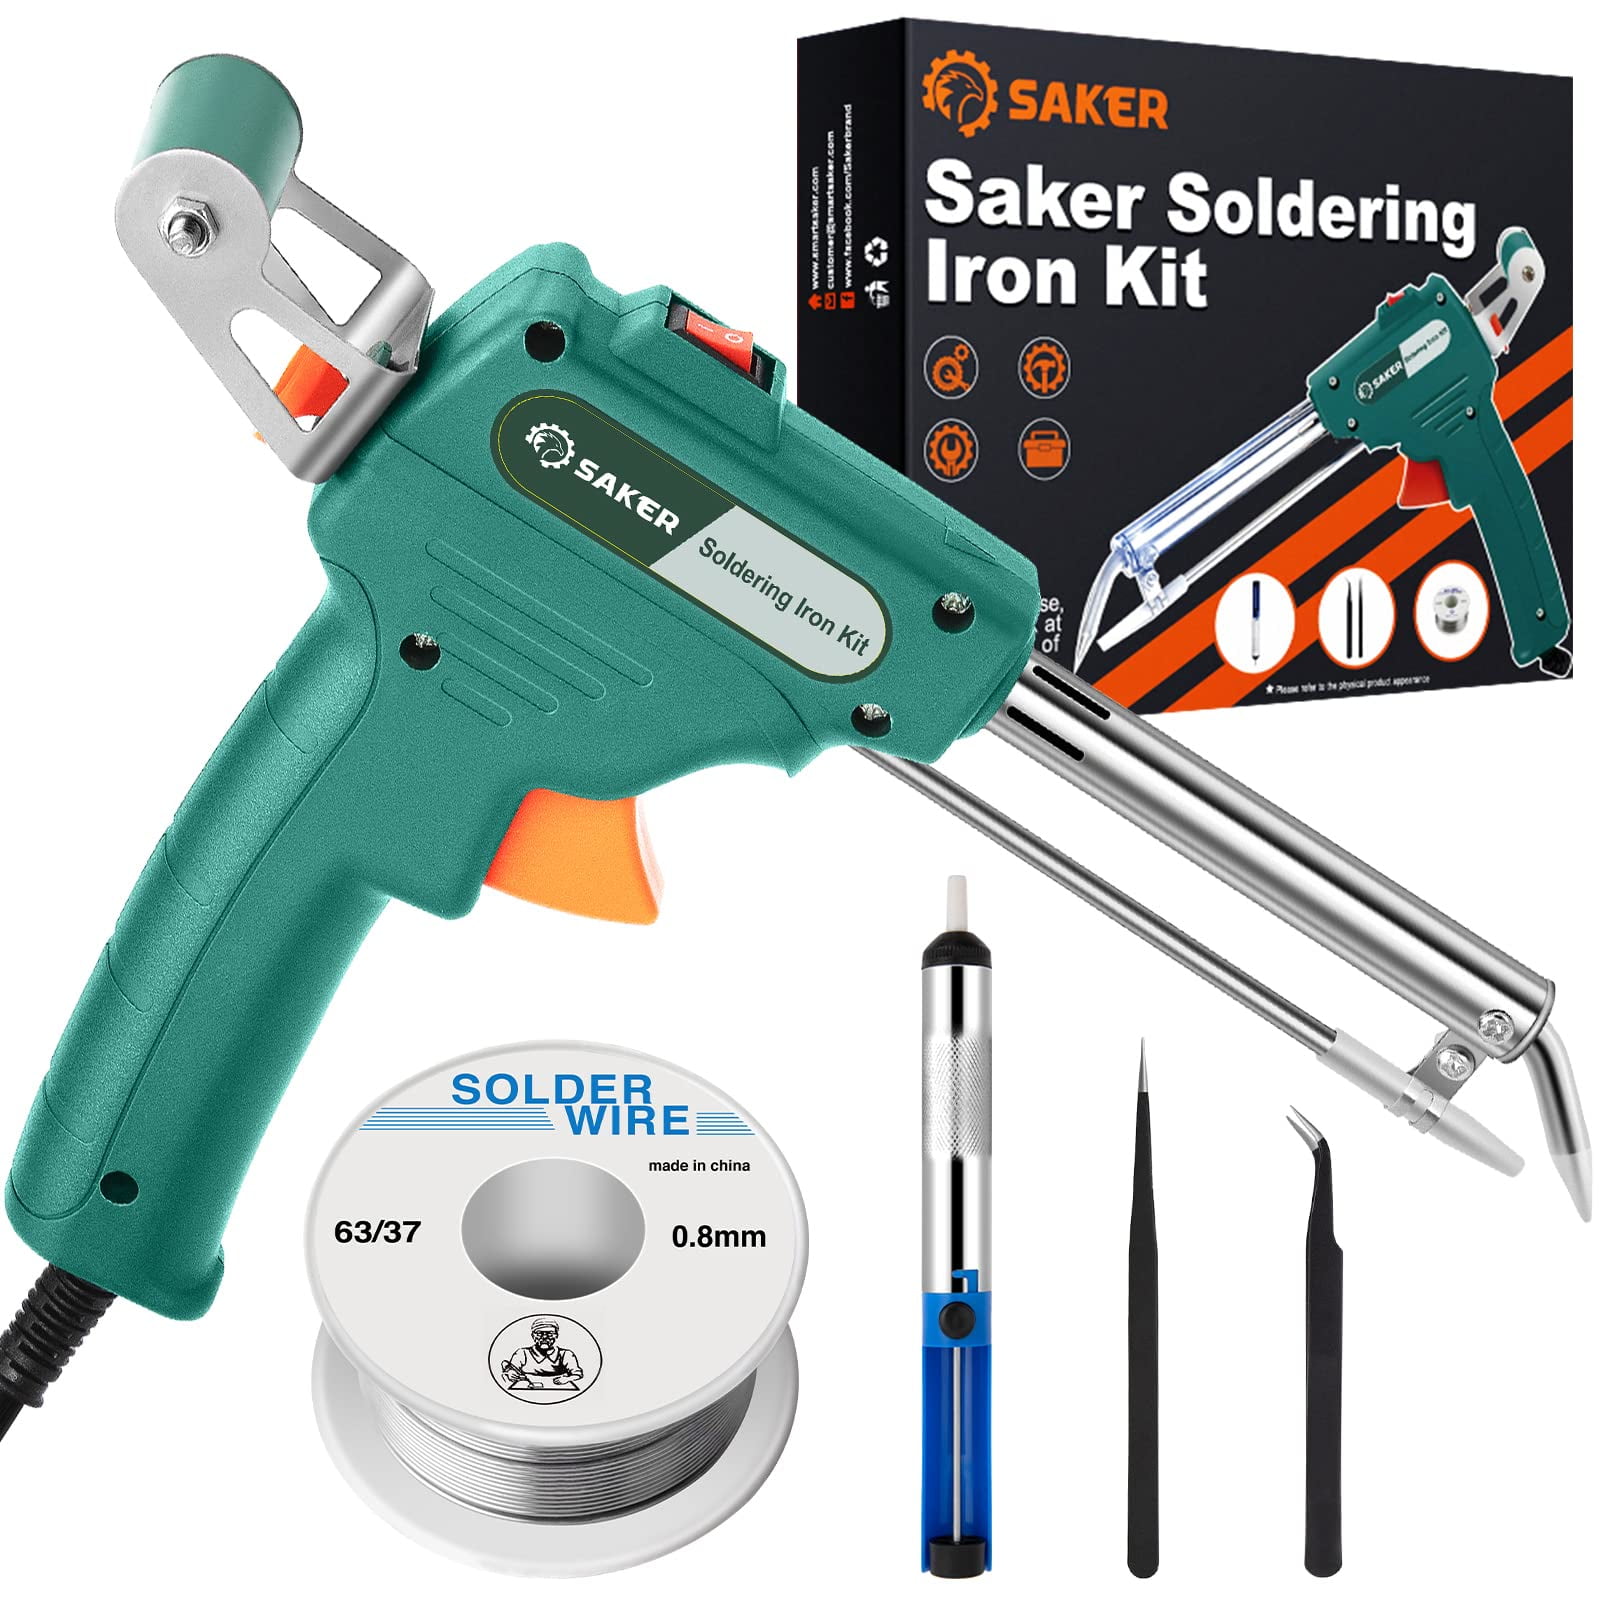 Saker Soldering Iron Kit, 60W 110V Corded Electric Welding Gun with Welding  Wire, One-handed Operation for Soldering Circuit Boards